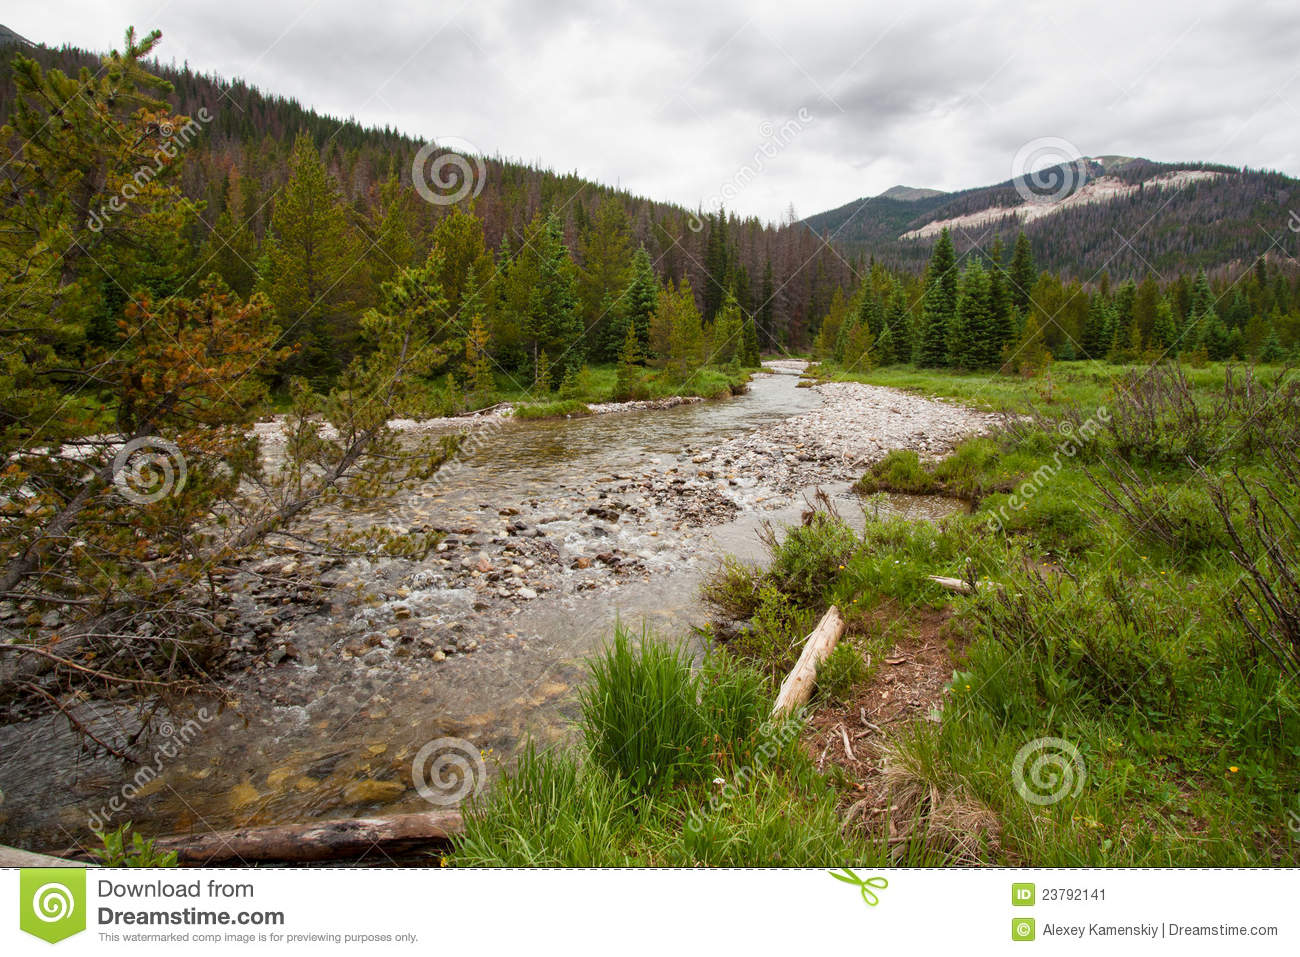 More Similar Stock Images Of   Stormy Weather In Rocky Mountains